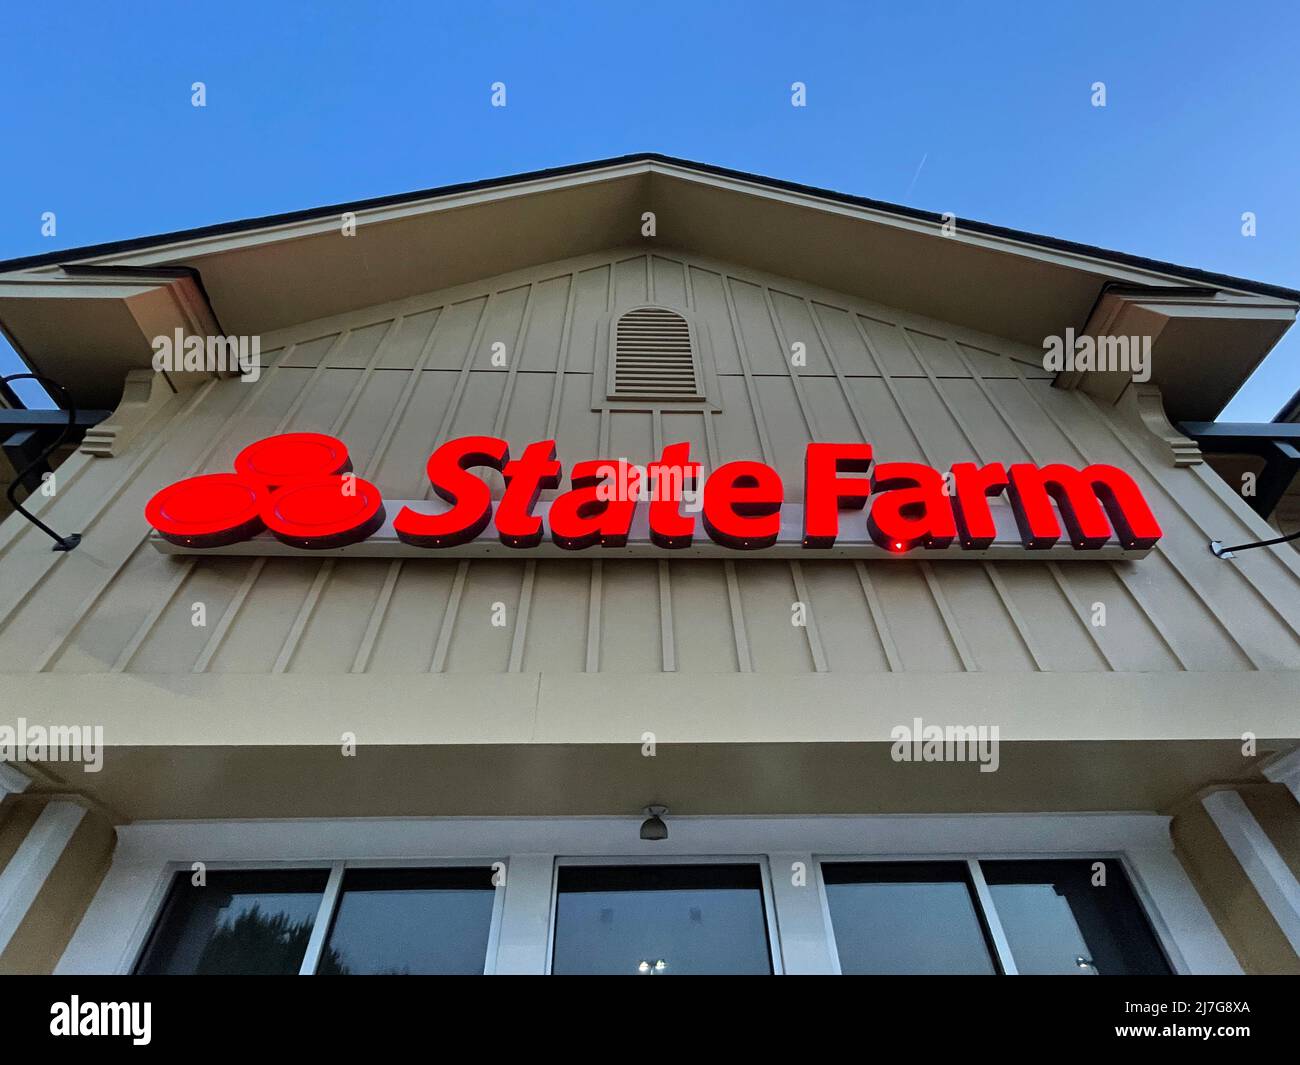 Augusta, Ga USA - 04 27 22: State Farm insurance office top sign view Stock Photo